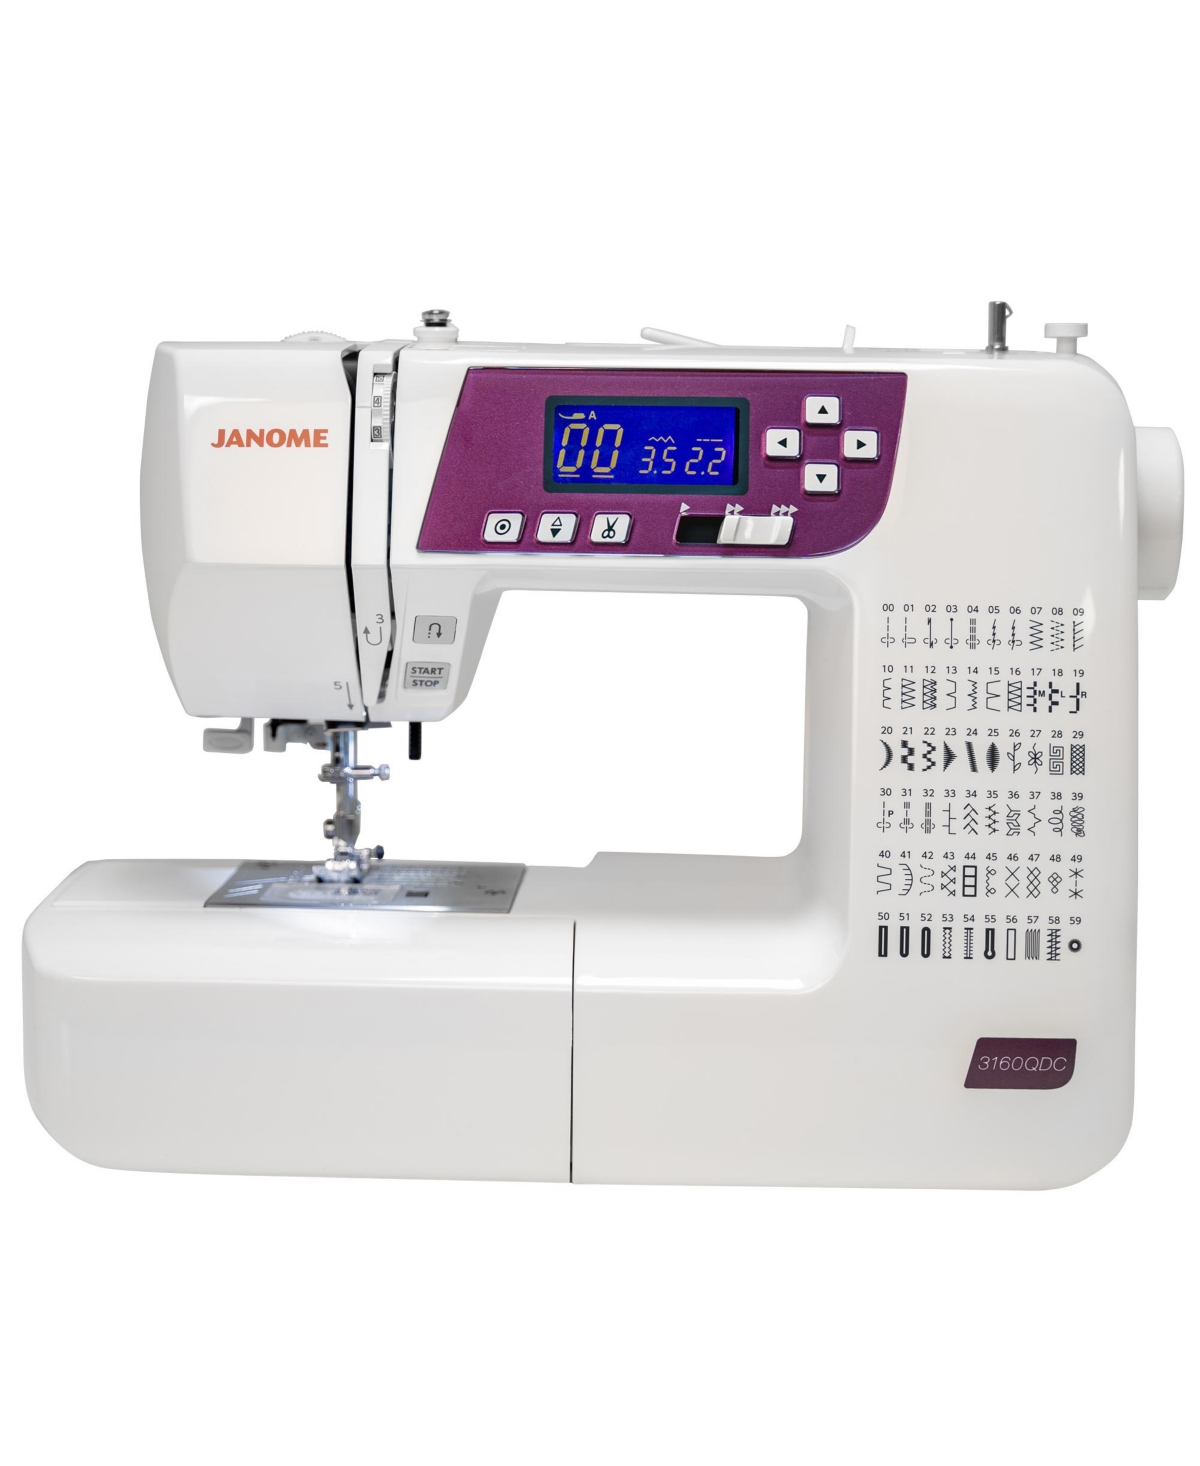 3160QDC-g Computerized Sewing and Quilting Machine - White